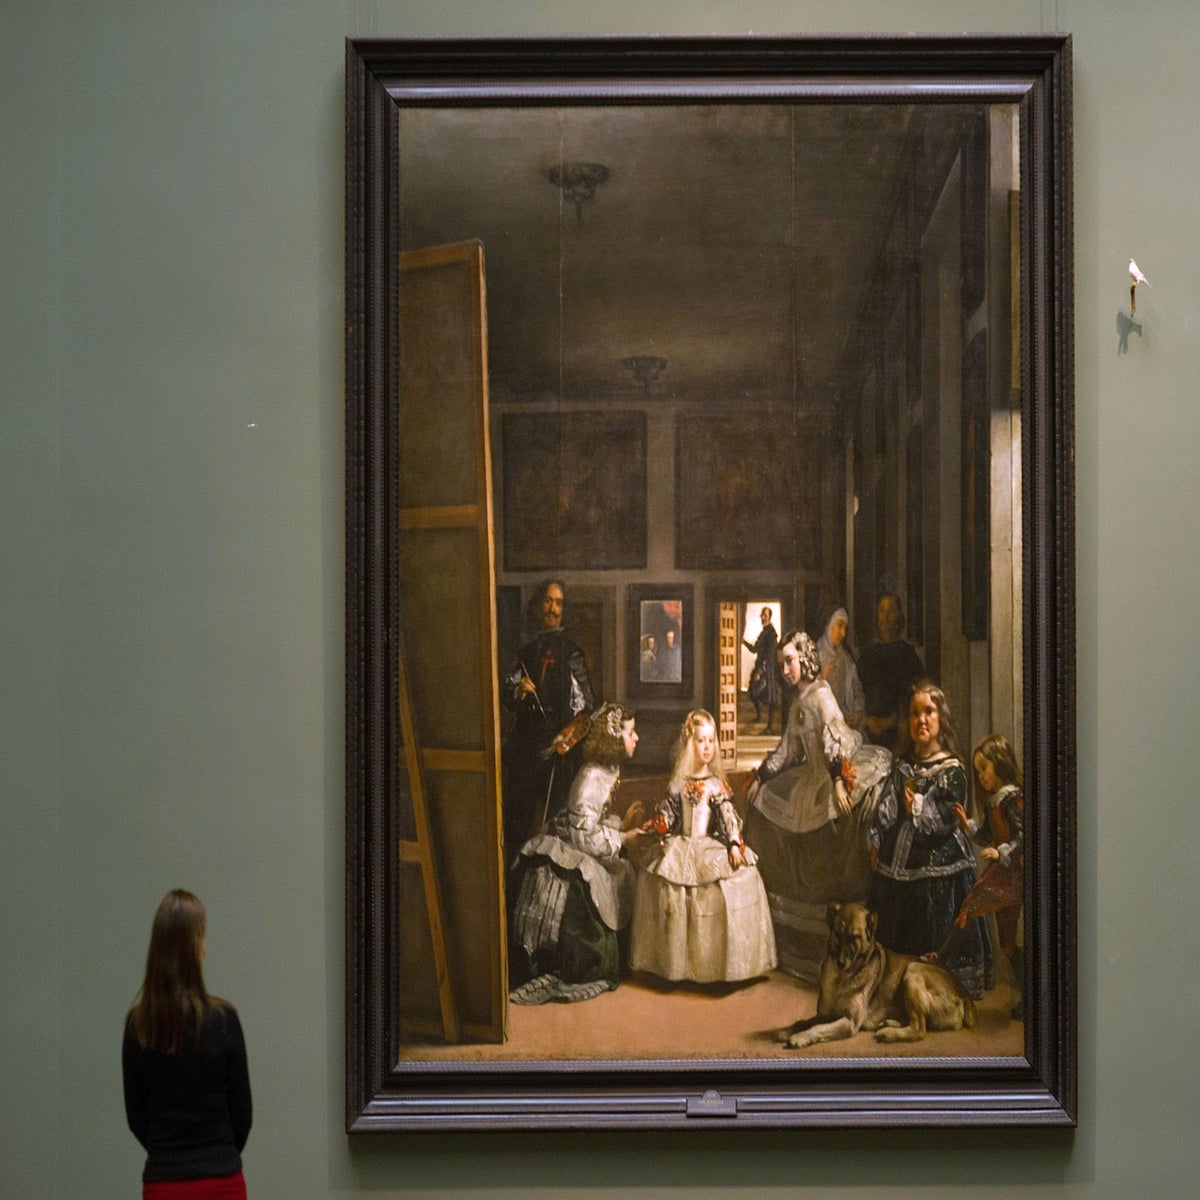 The History and Mystery of 'Las Meninas' by Diego Velázquez